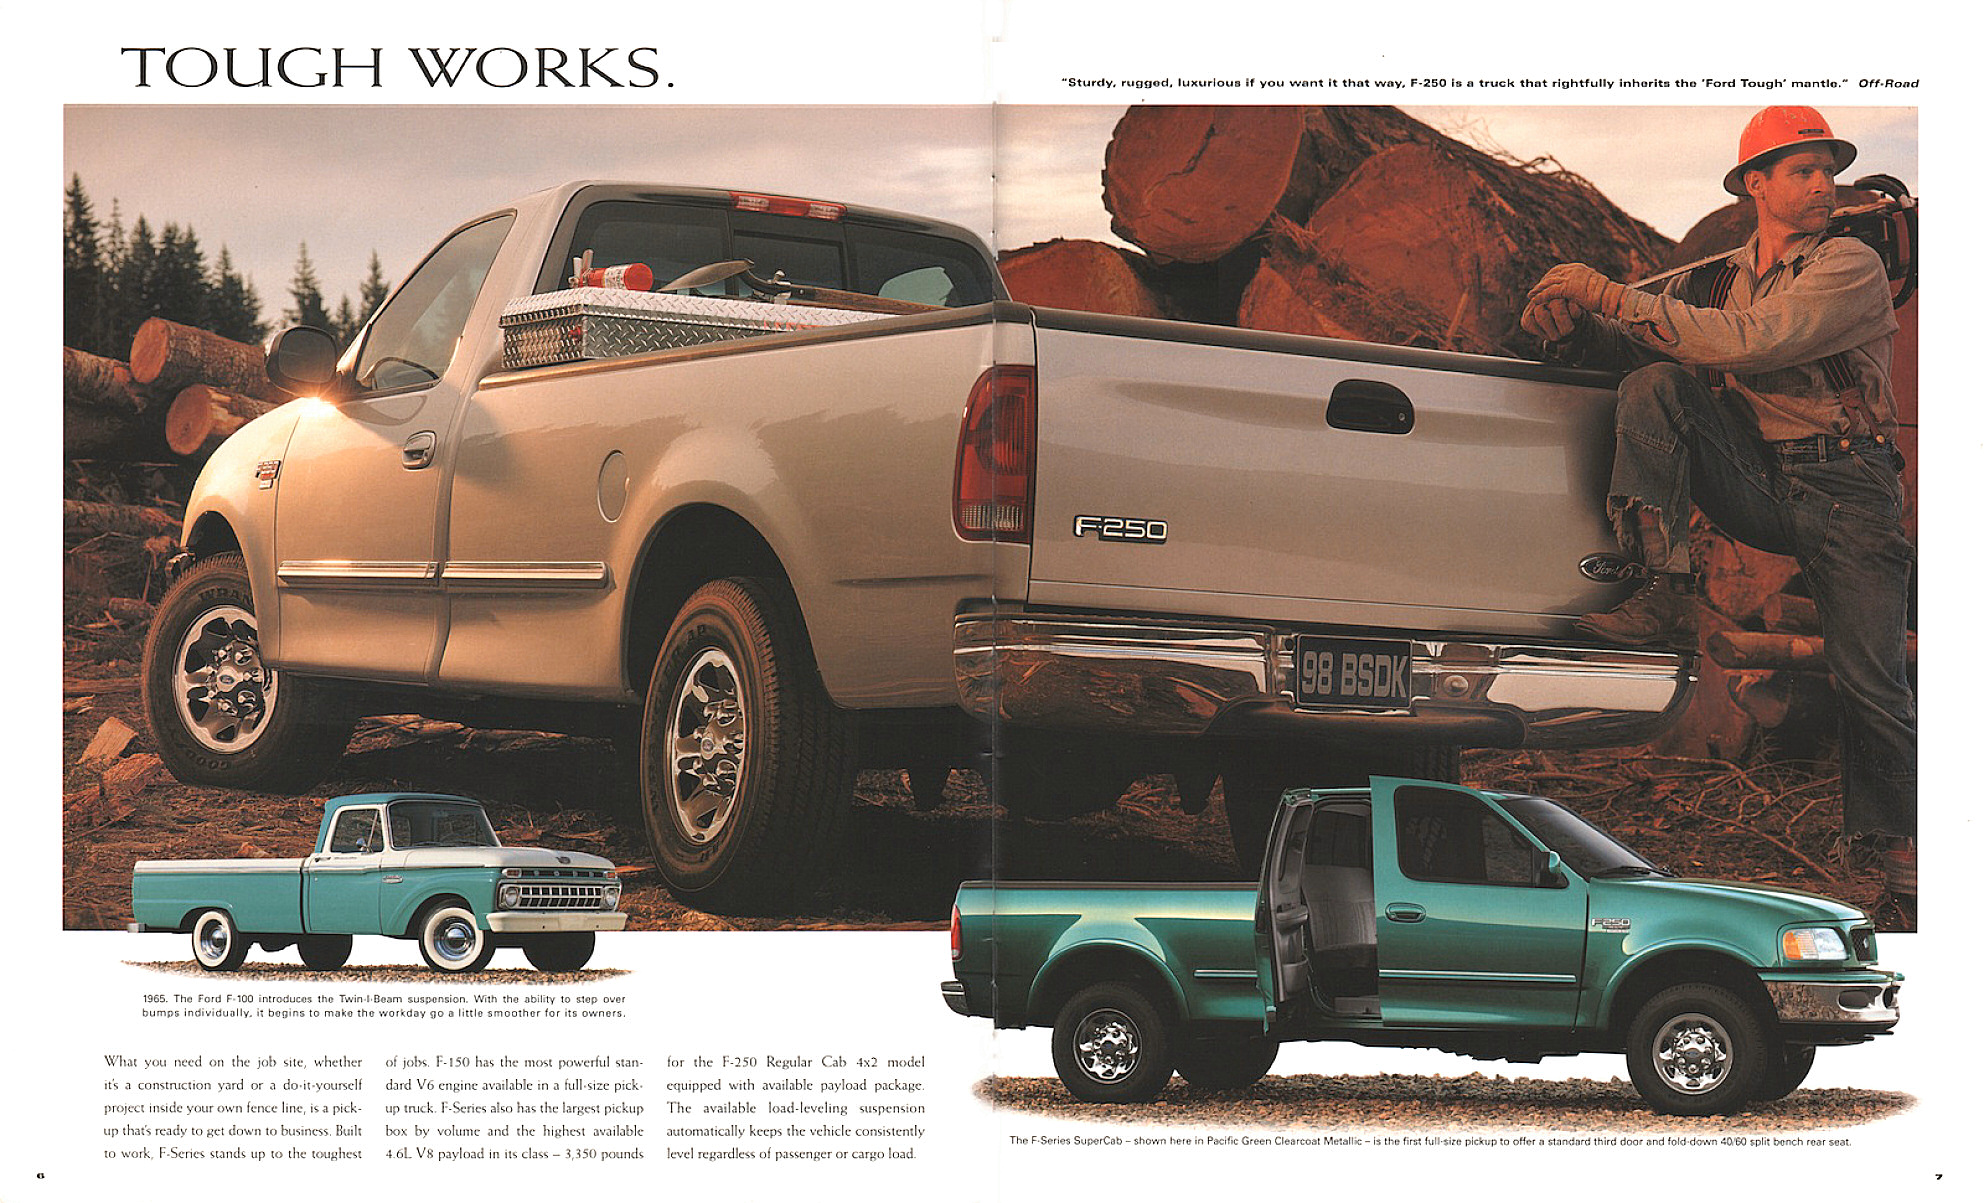 1998_Ford_F-Series-06-07